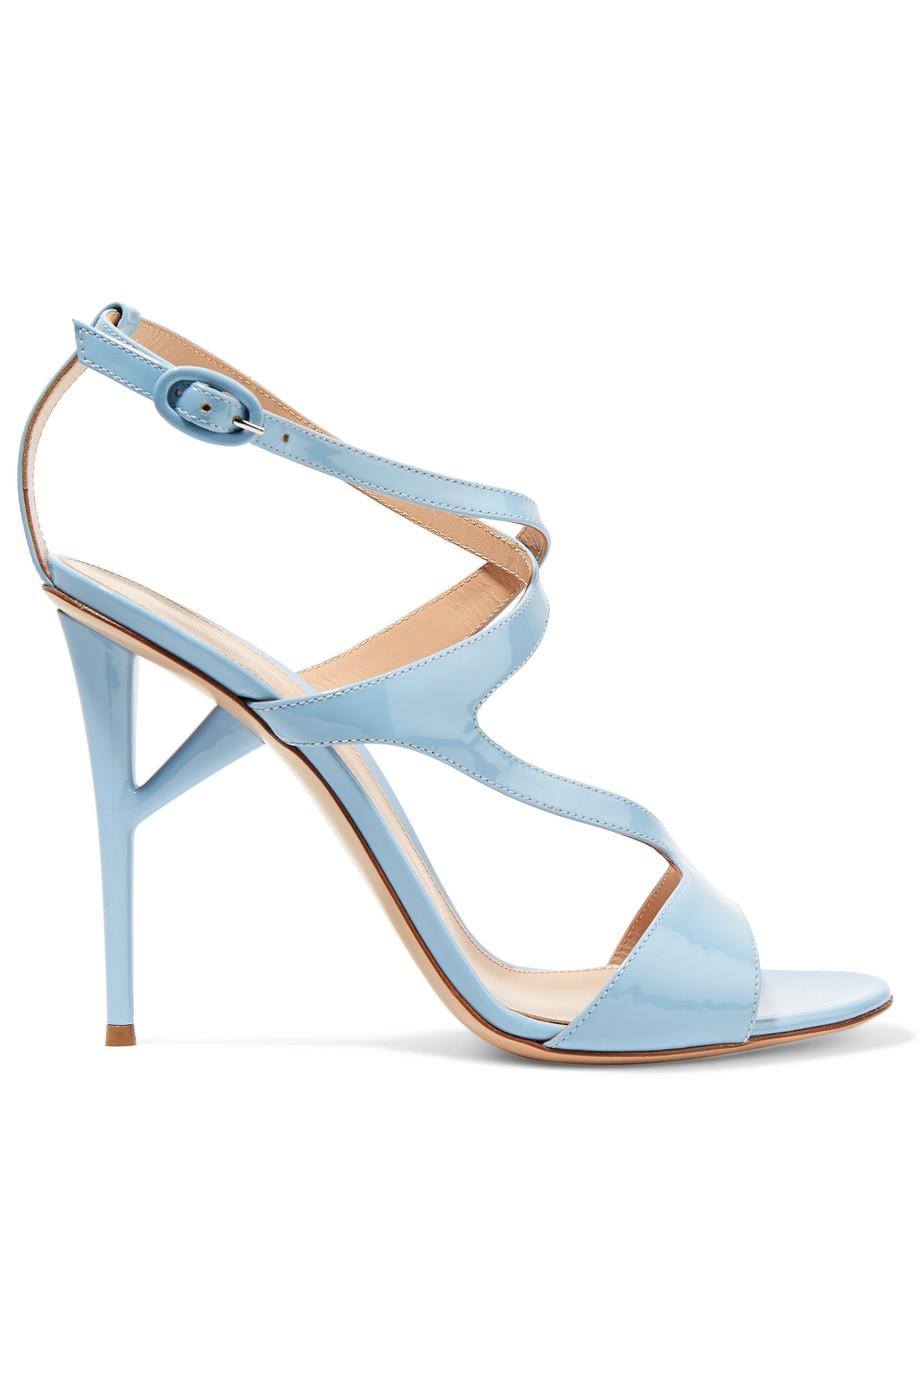 Gianvito Rossi Cutout Patent-leather Sandals | ModeSens